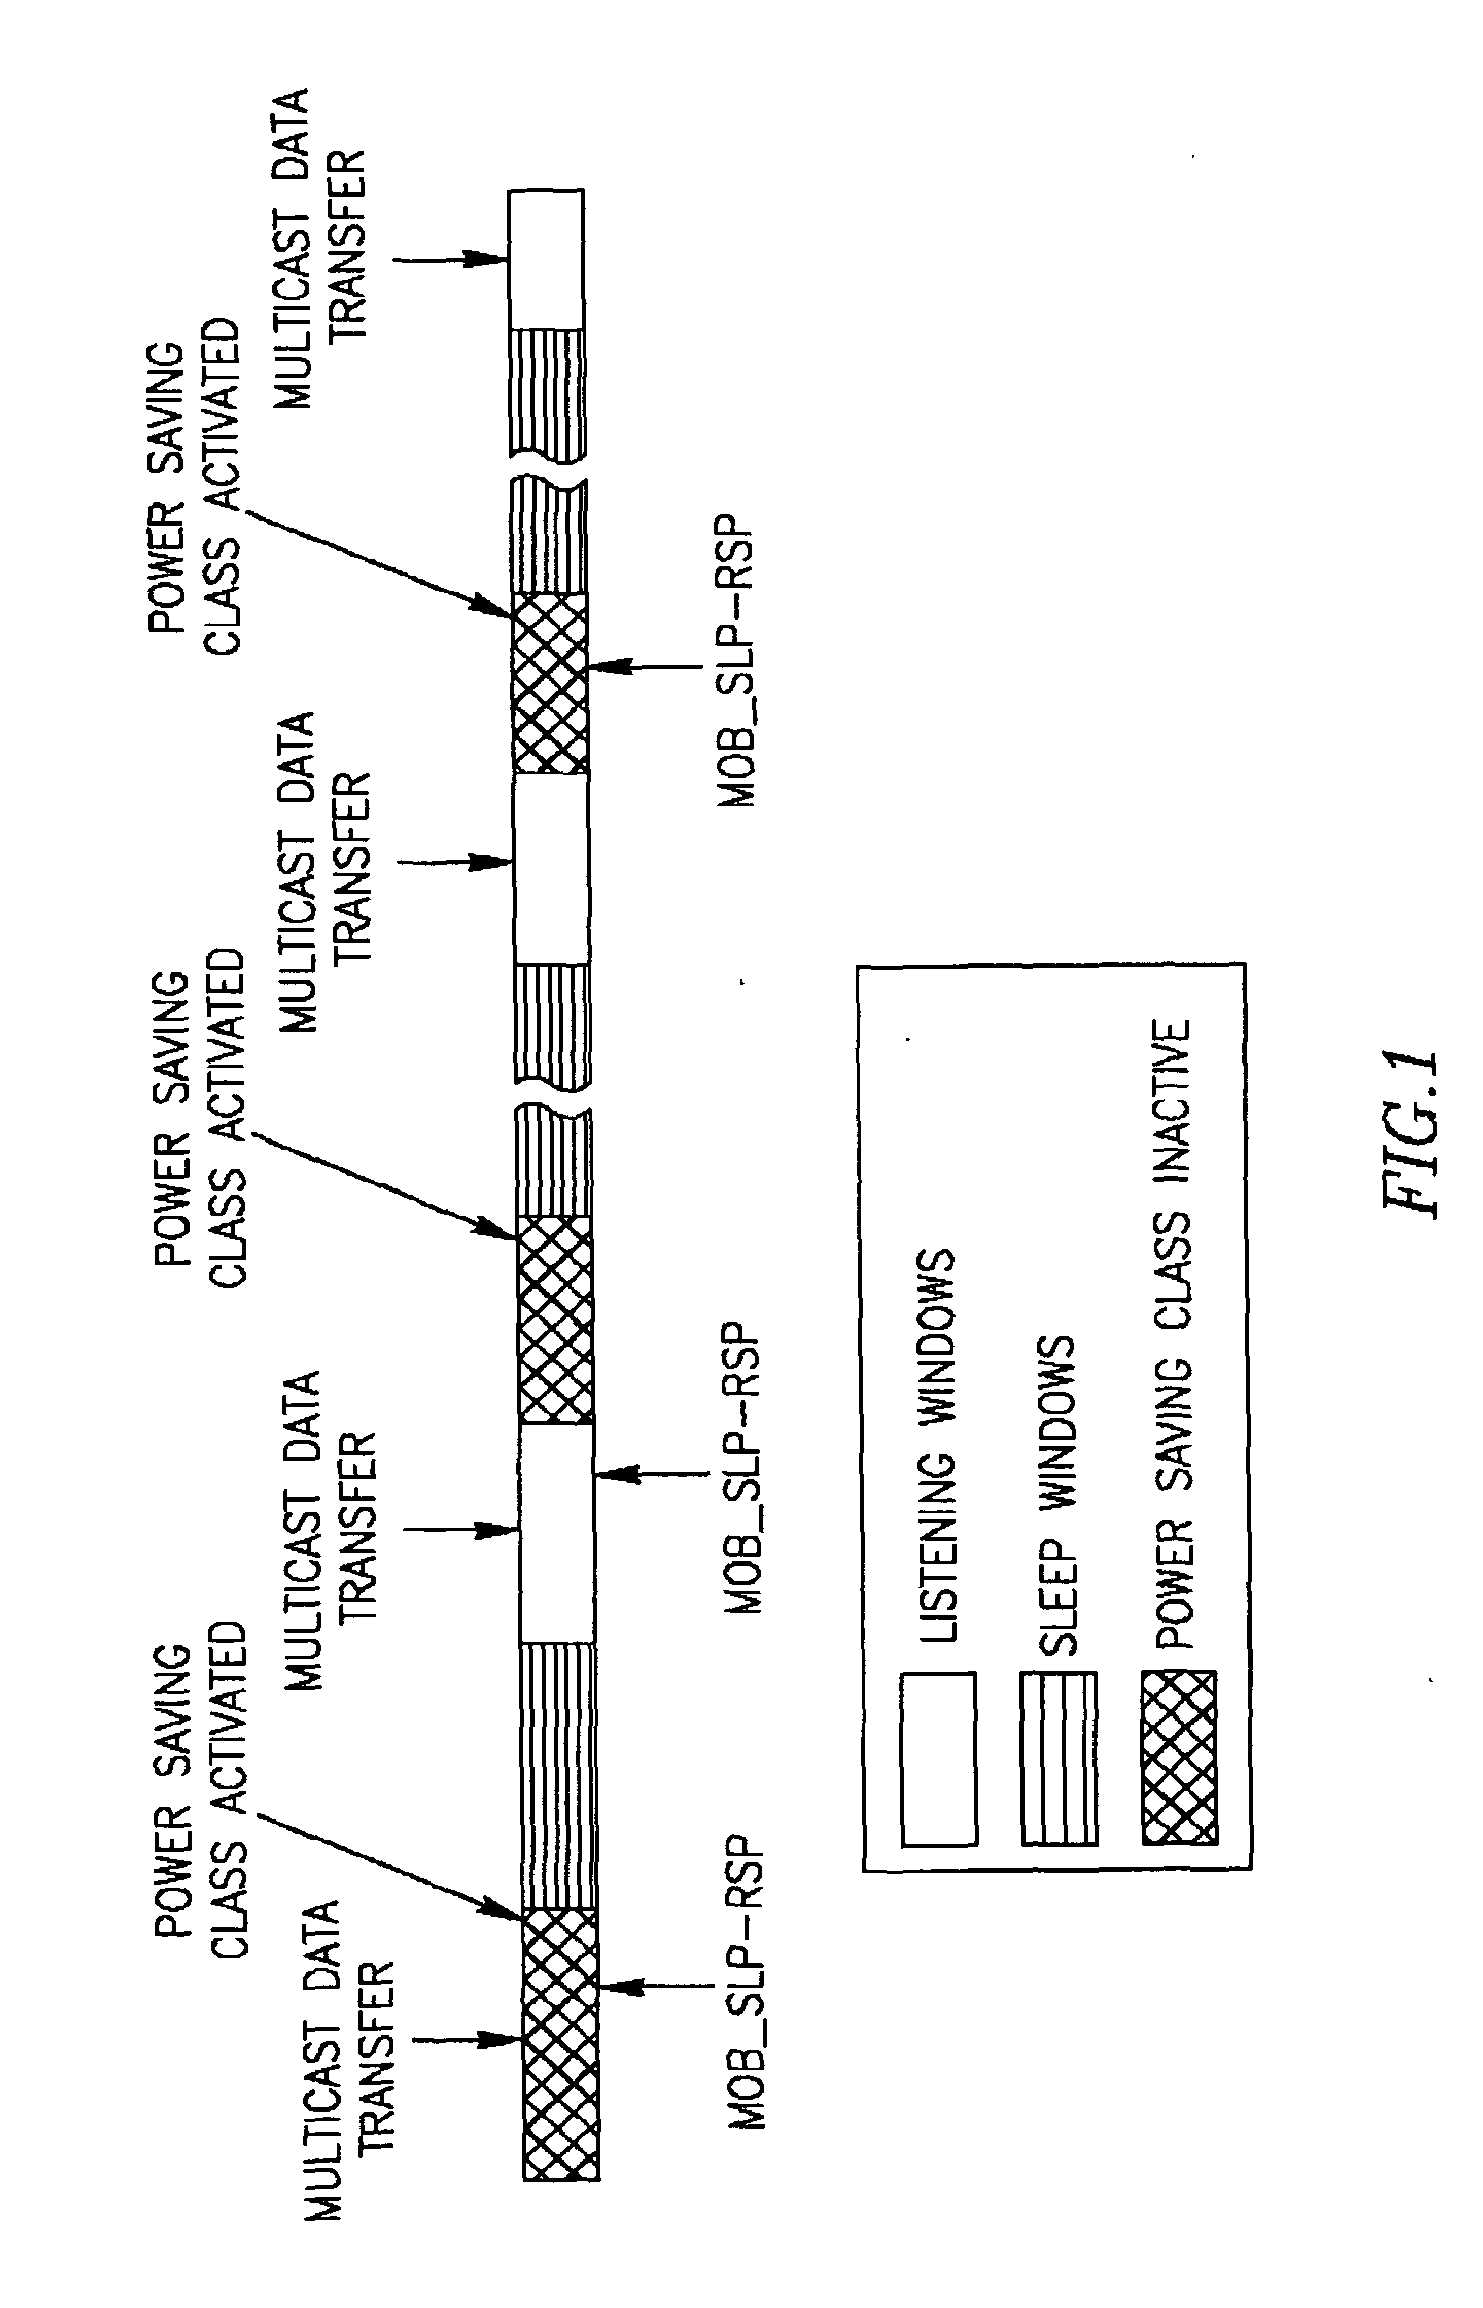 Method and apparatus for power saving in wireless systems